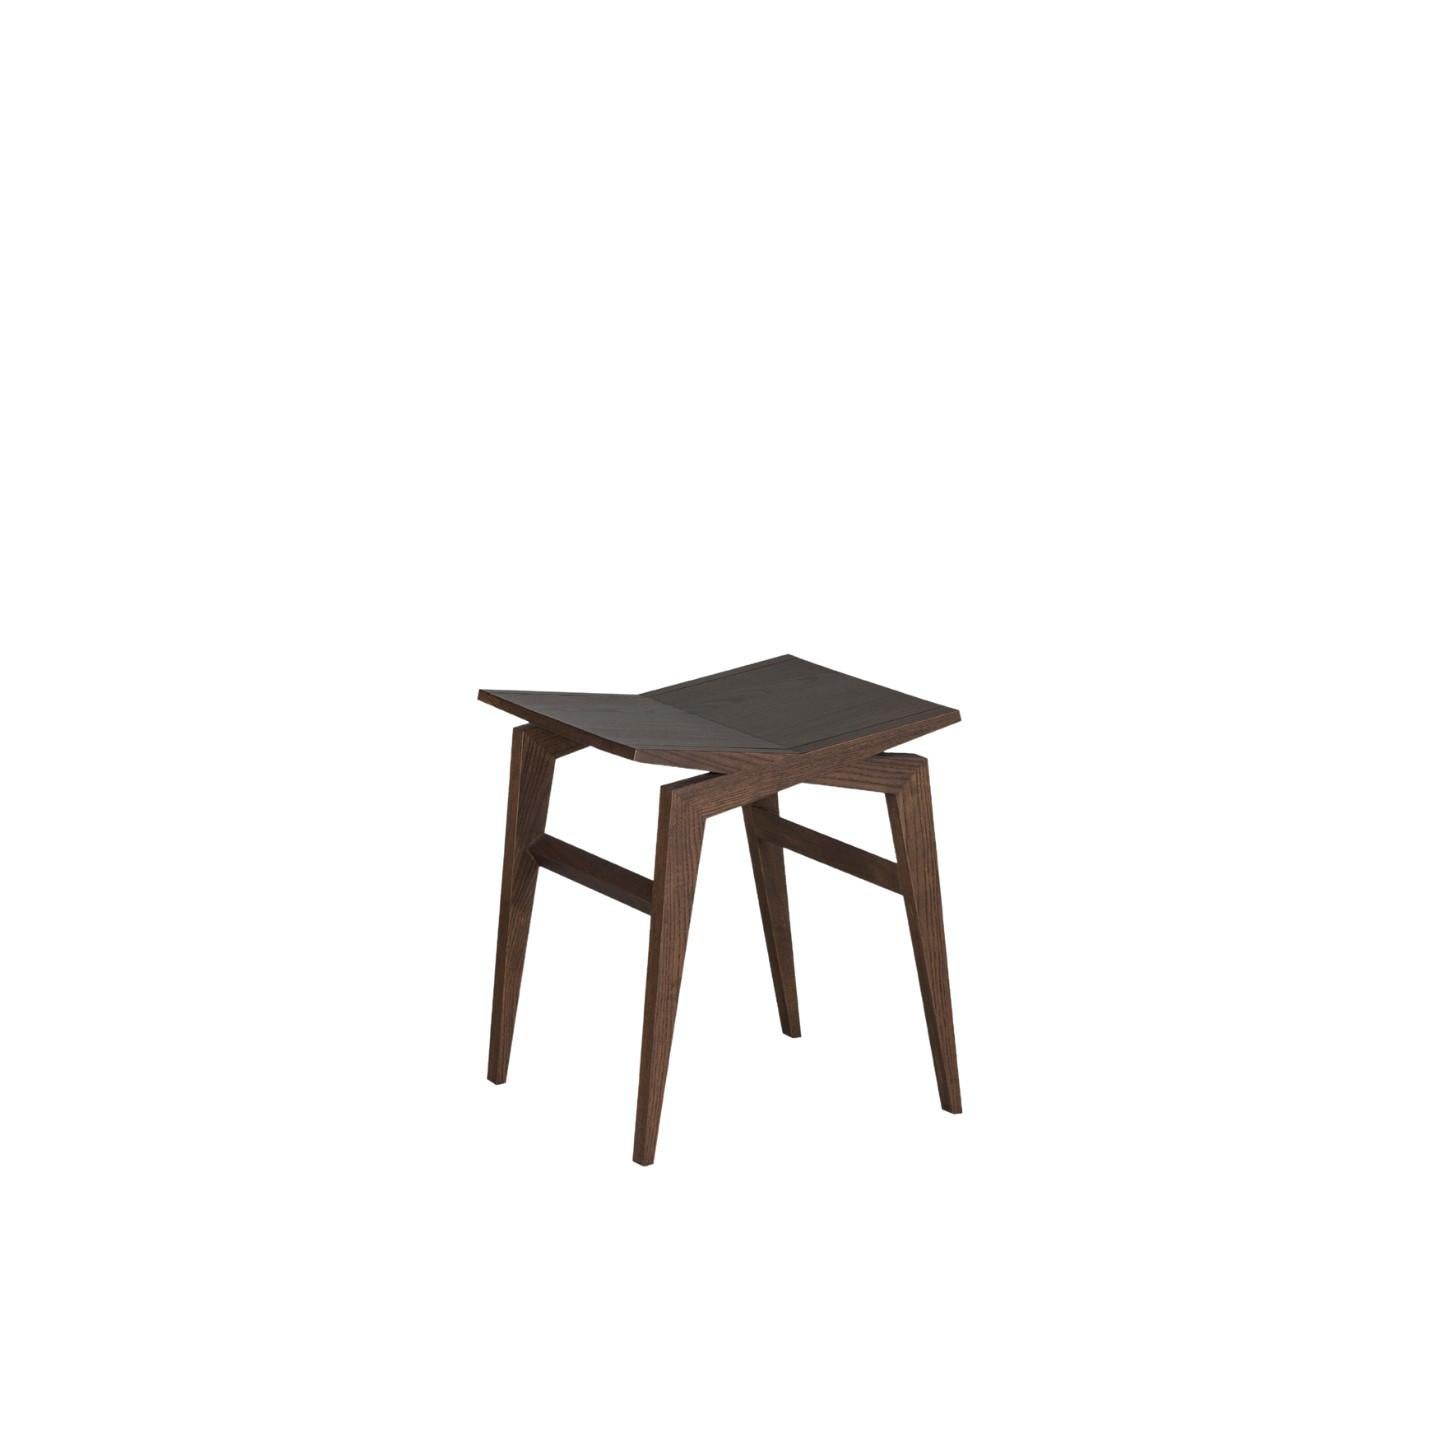 Low stool made of ash
wood.
Design by Itamar Harari 
Made in Italy by Morelato
 